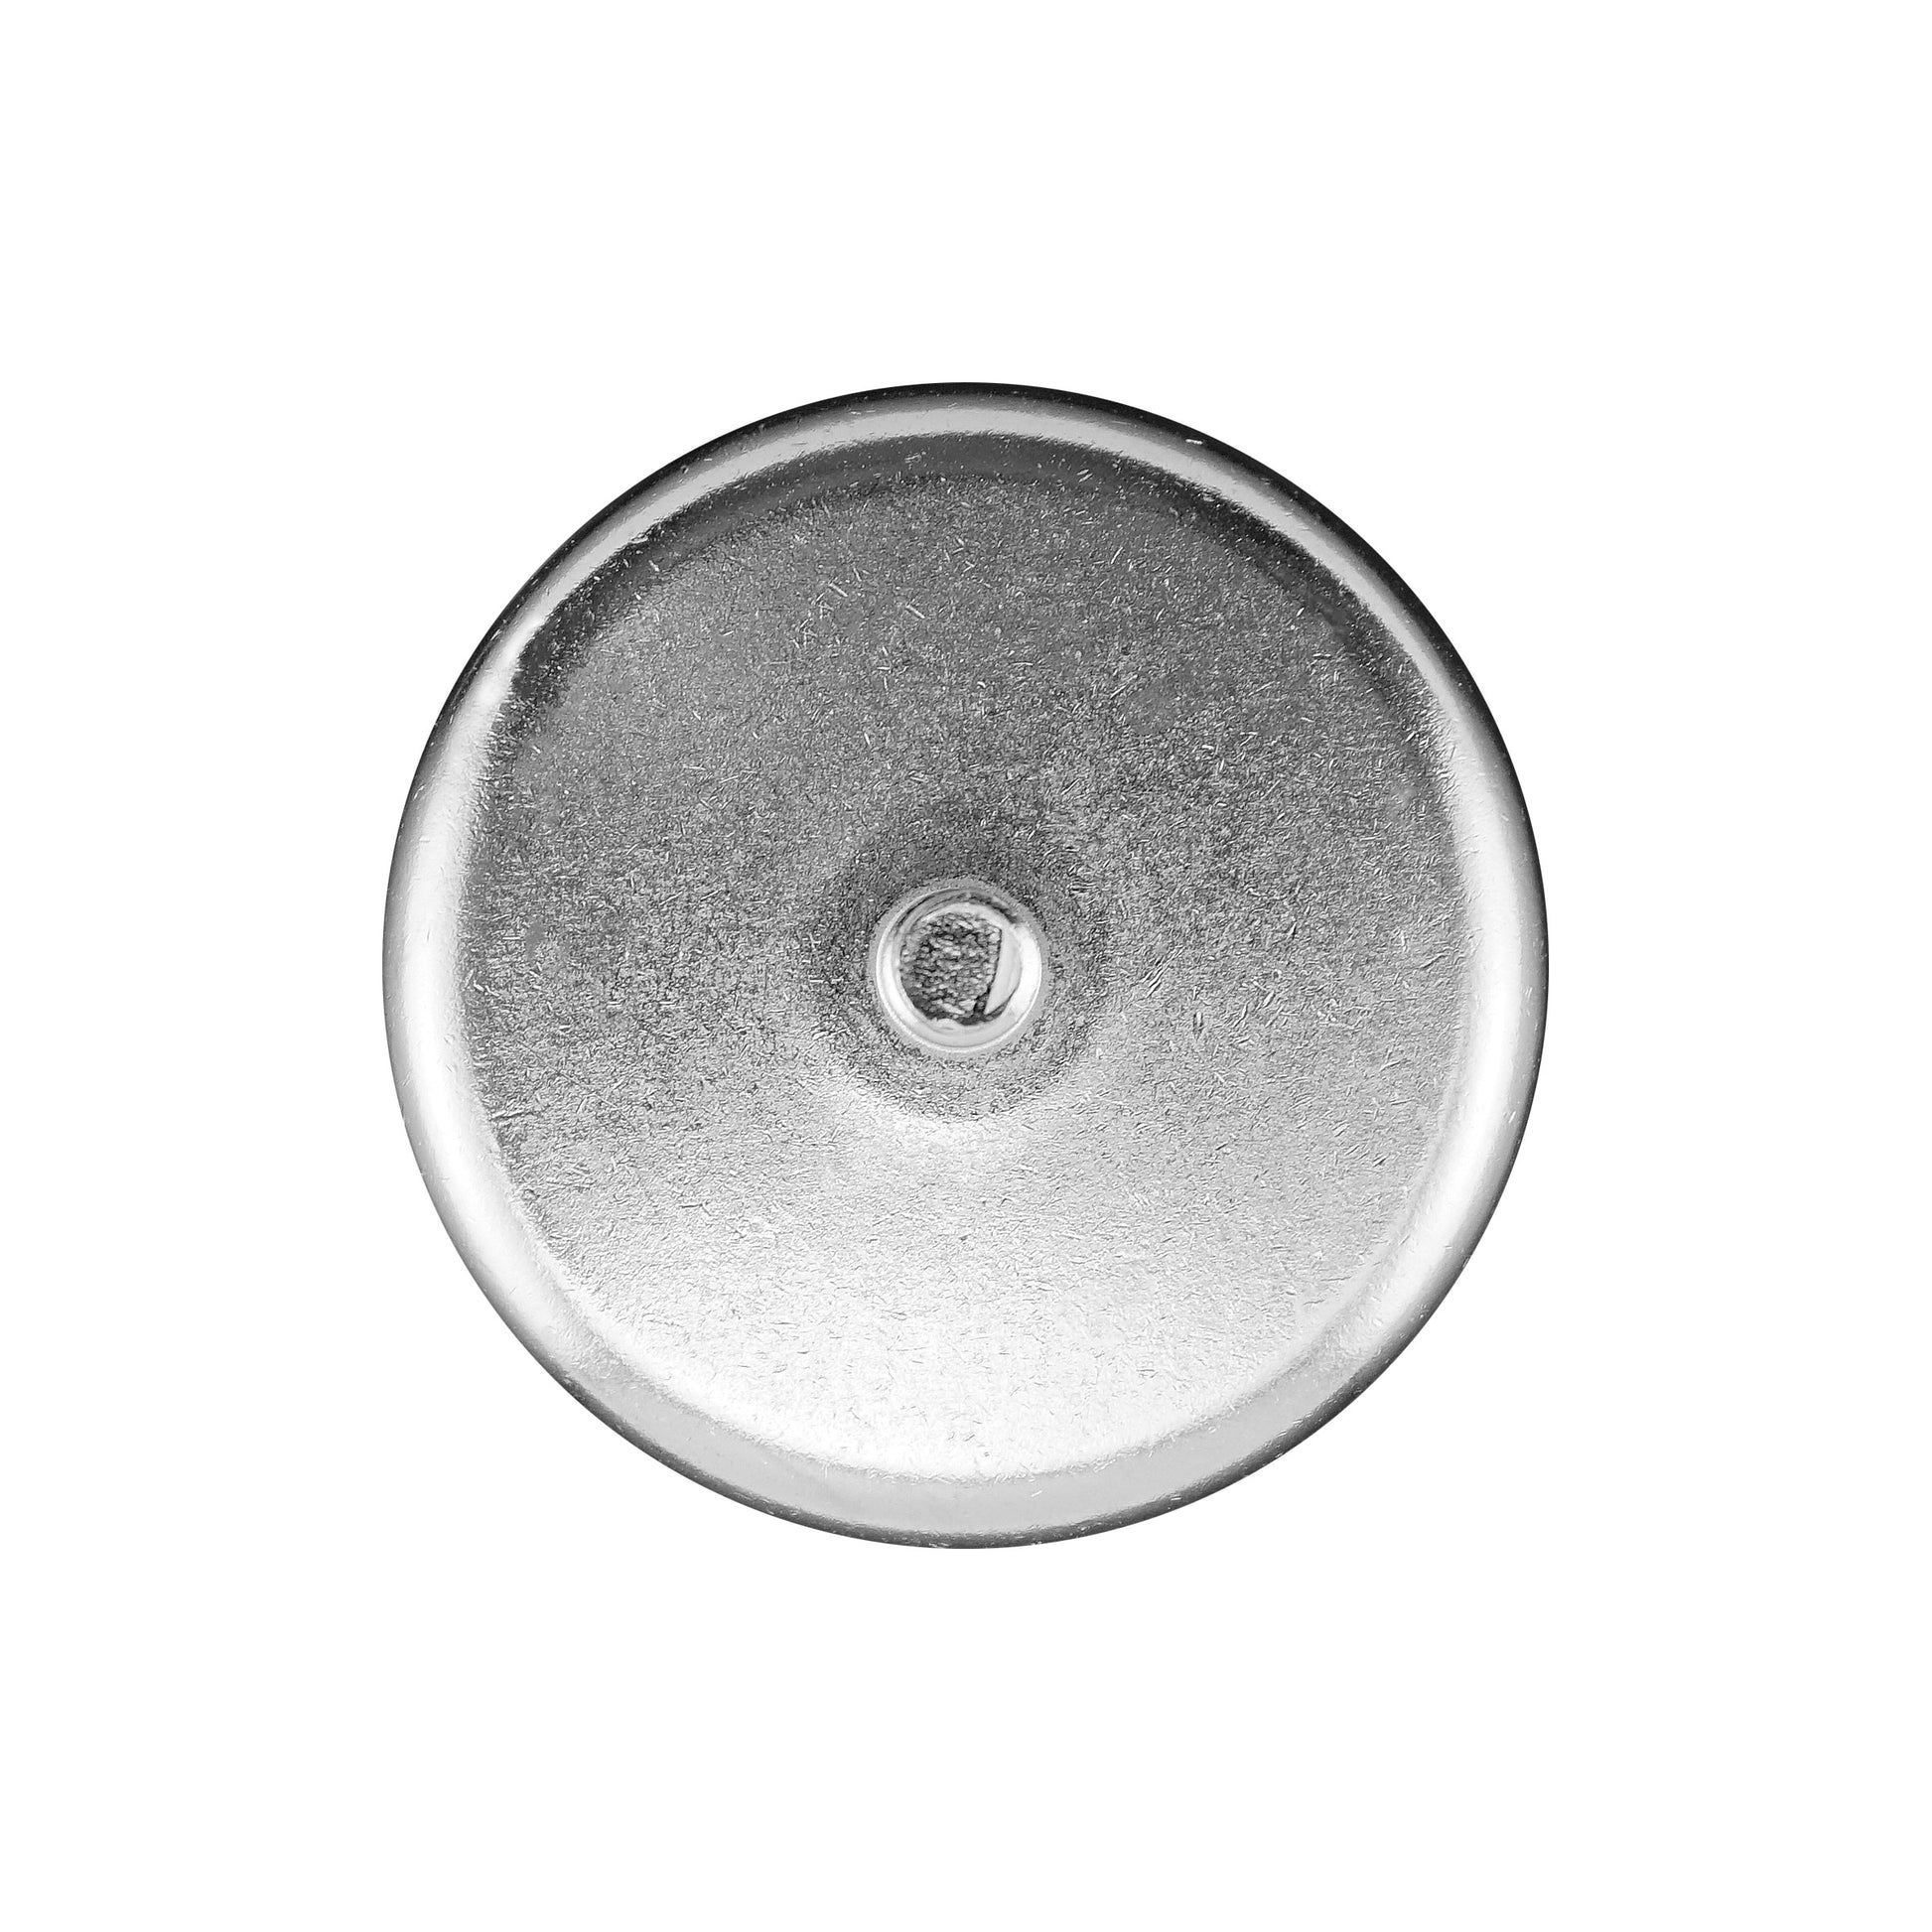 Load image into Gallery viewer, CACM300S01 Heavy-Duty Ceramic Round Base Magnet with Male Stud - Bottom View